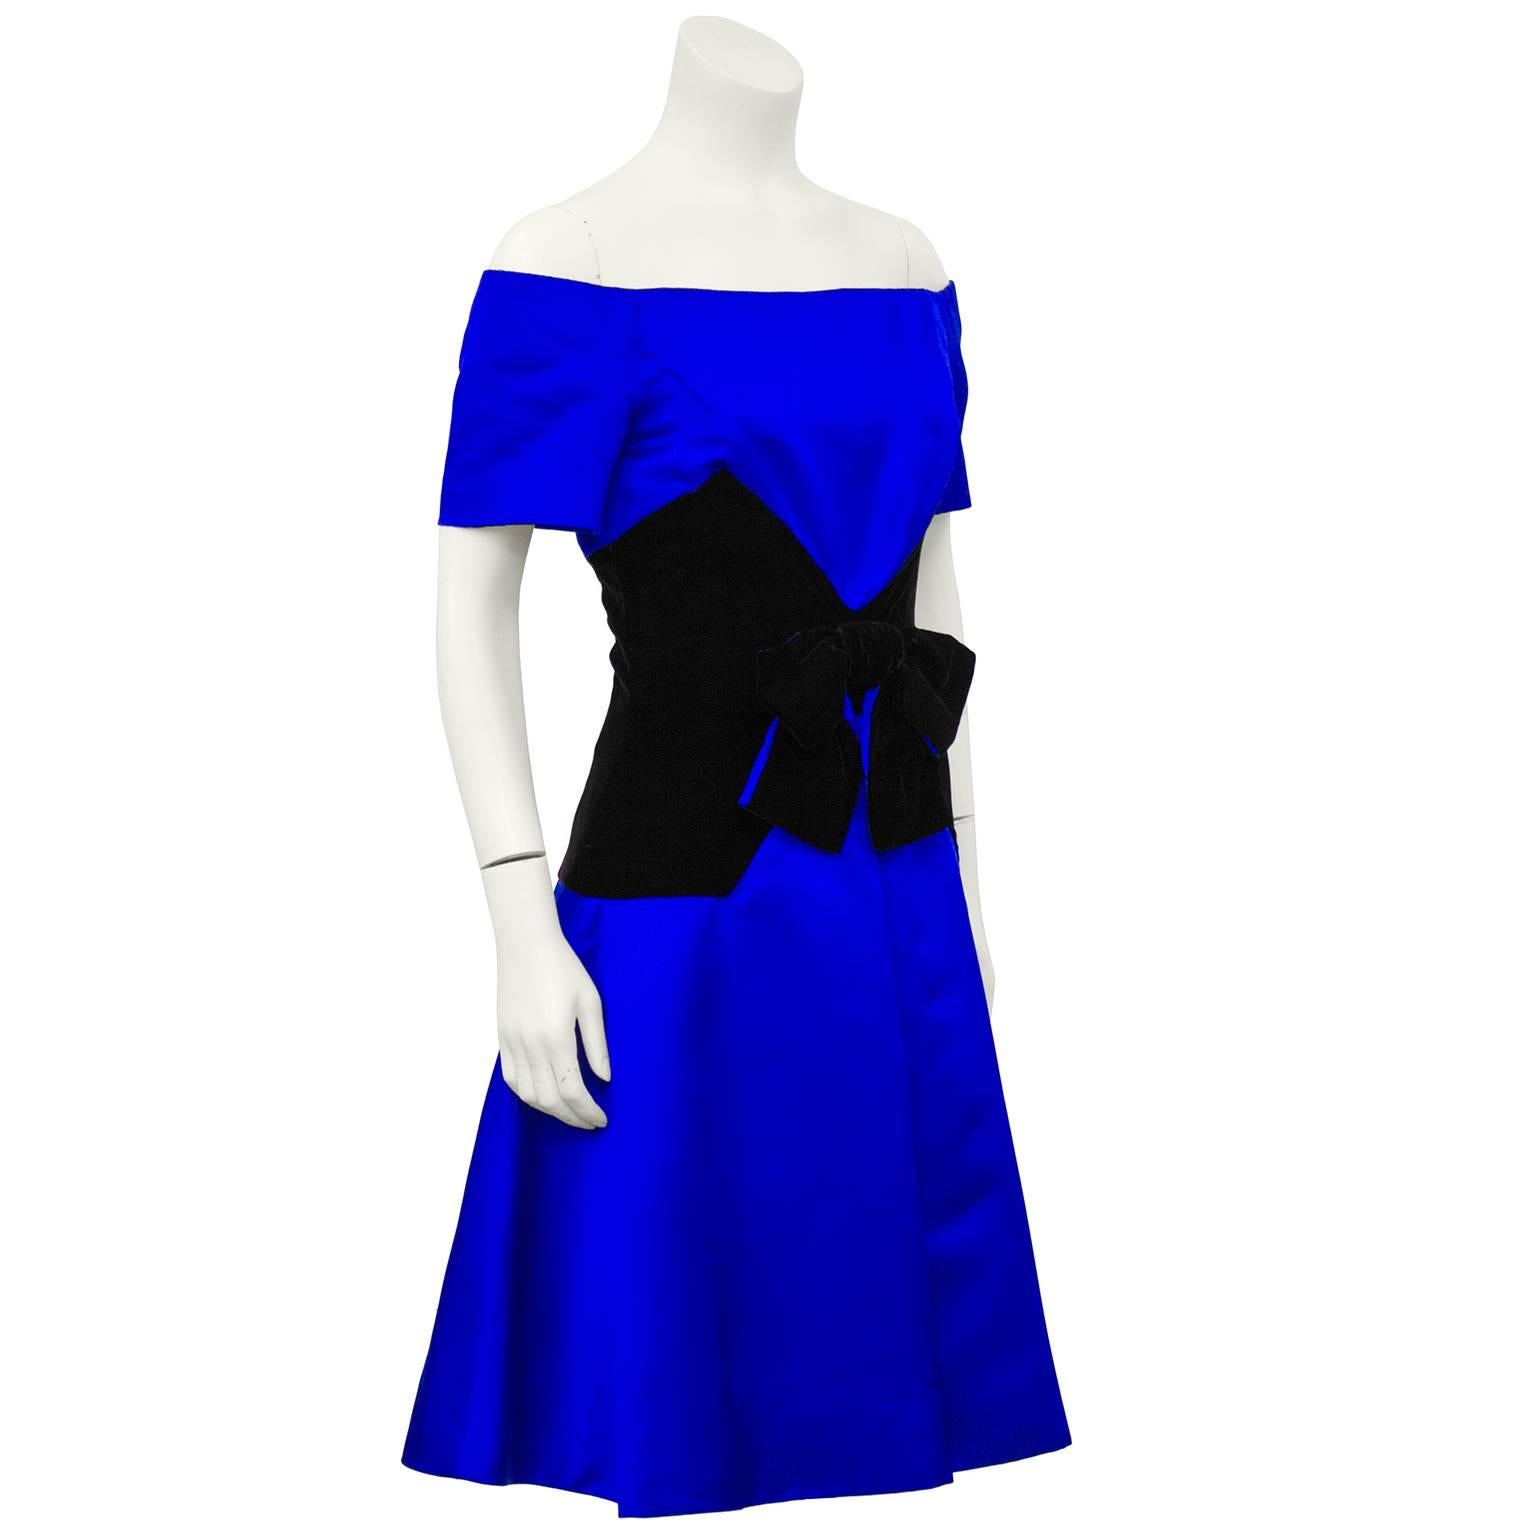 Stunning Scaasi cocktail dress dating from the 1980s. Royal blue satin with a jet black velvet wide corset waistband, featuring a very typical Scaasi large bow. Off-the-shoulder with short sleeves. Excellent like new vintage condition. Fits like a